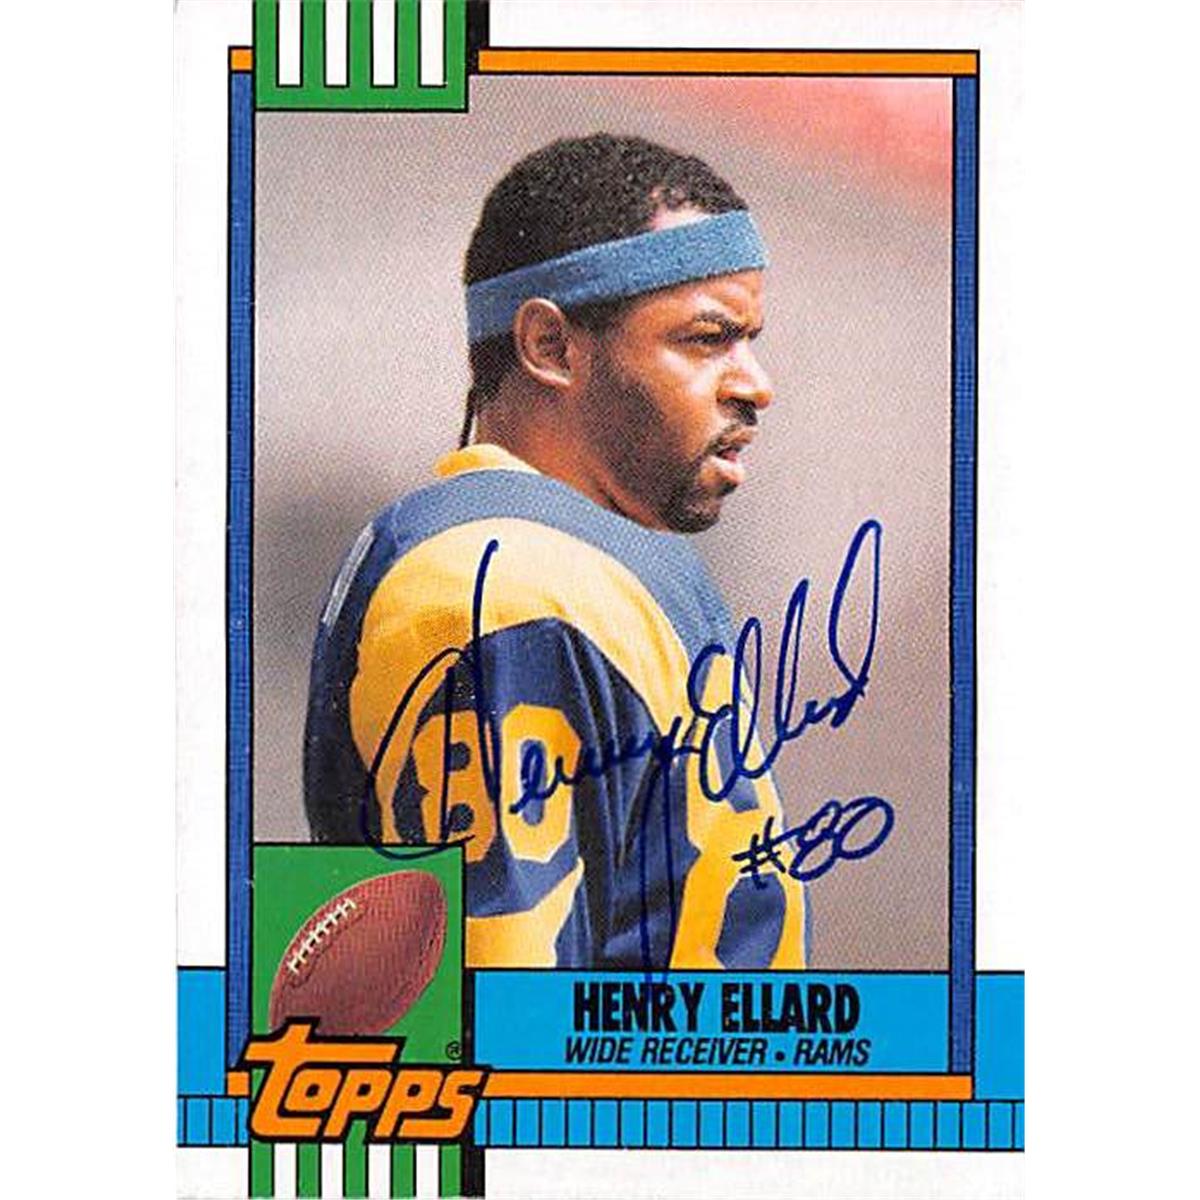 Picture of Autograph Warehouse 366694 Henry Ellard Autographed Football Card - 1990 Topps 72